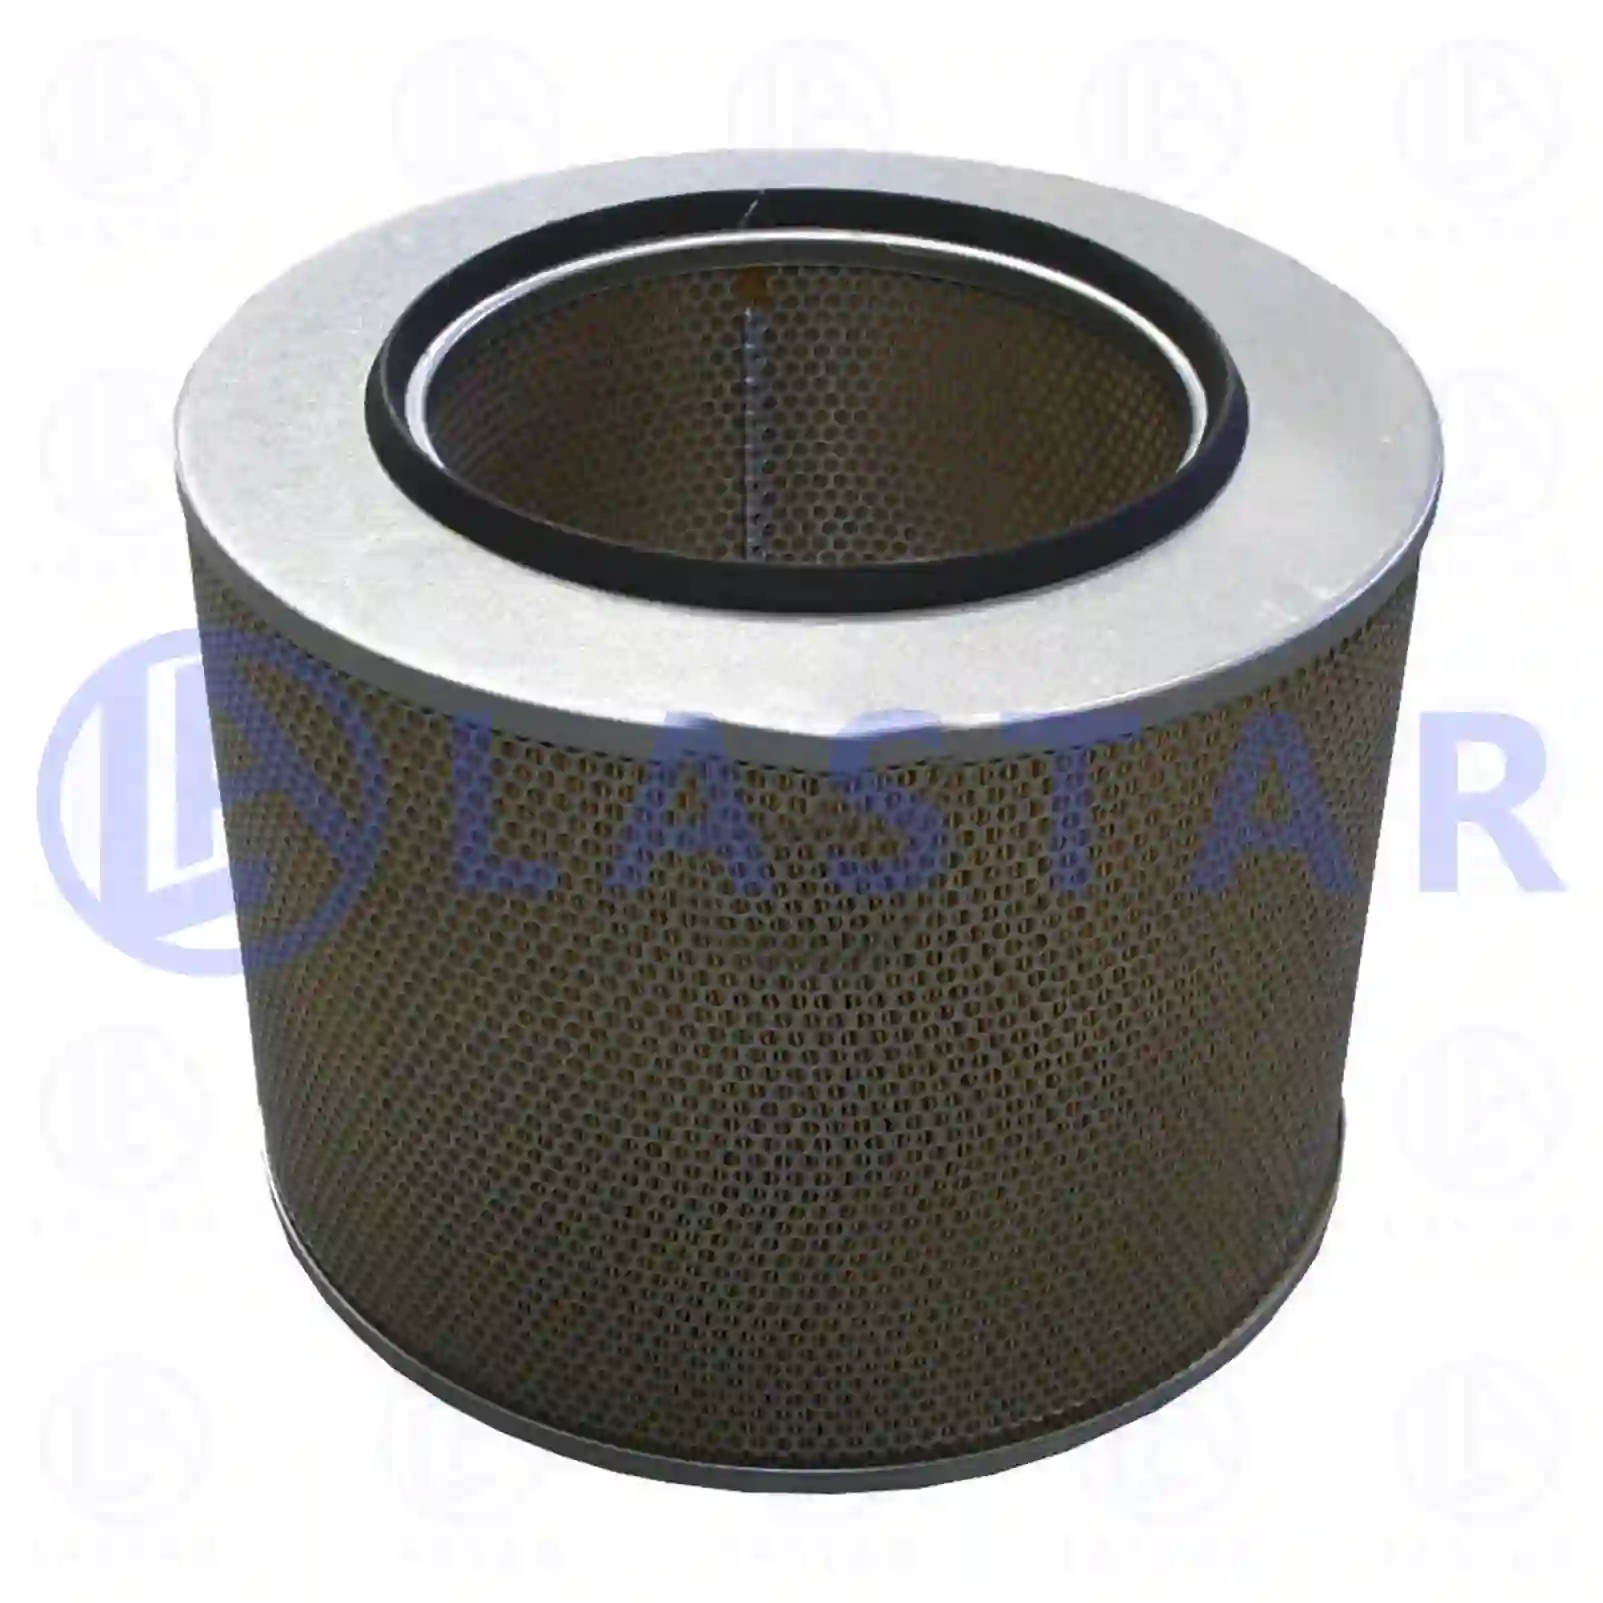 Air filter, 77706298, 0030949104, , , ||  77706298 Lastar Spare Part | Truck Spare Parts, Auotomotive Spare Parts Air filter, 77706298, 0030949104, , , ||  77706298 Lastar Spare Part | Truck Spare Parts, Auotomotive Spare Parts